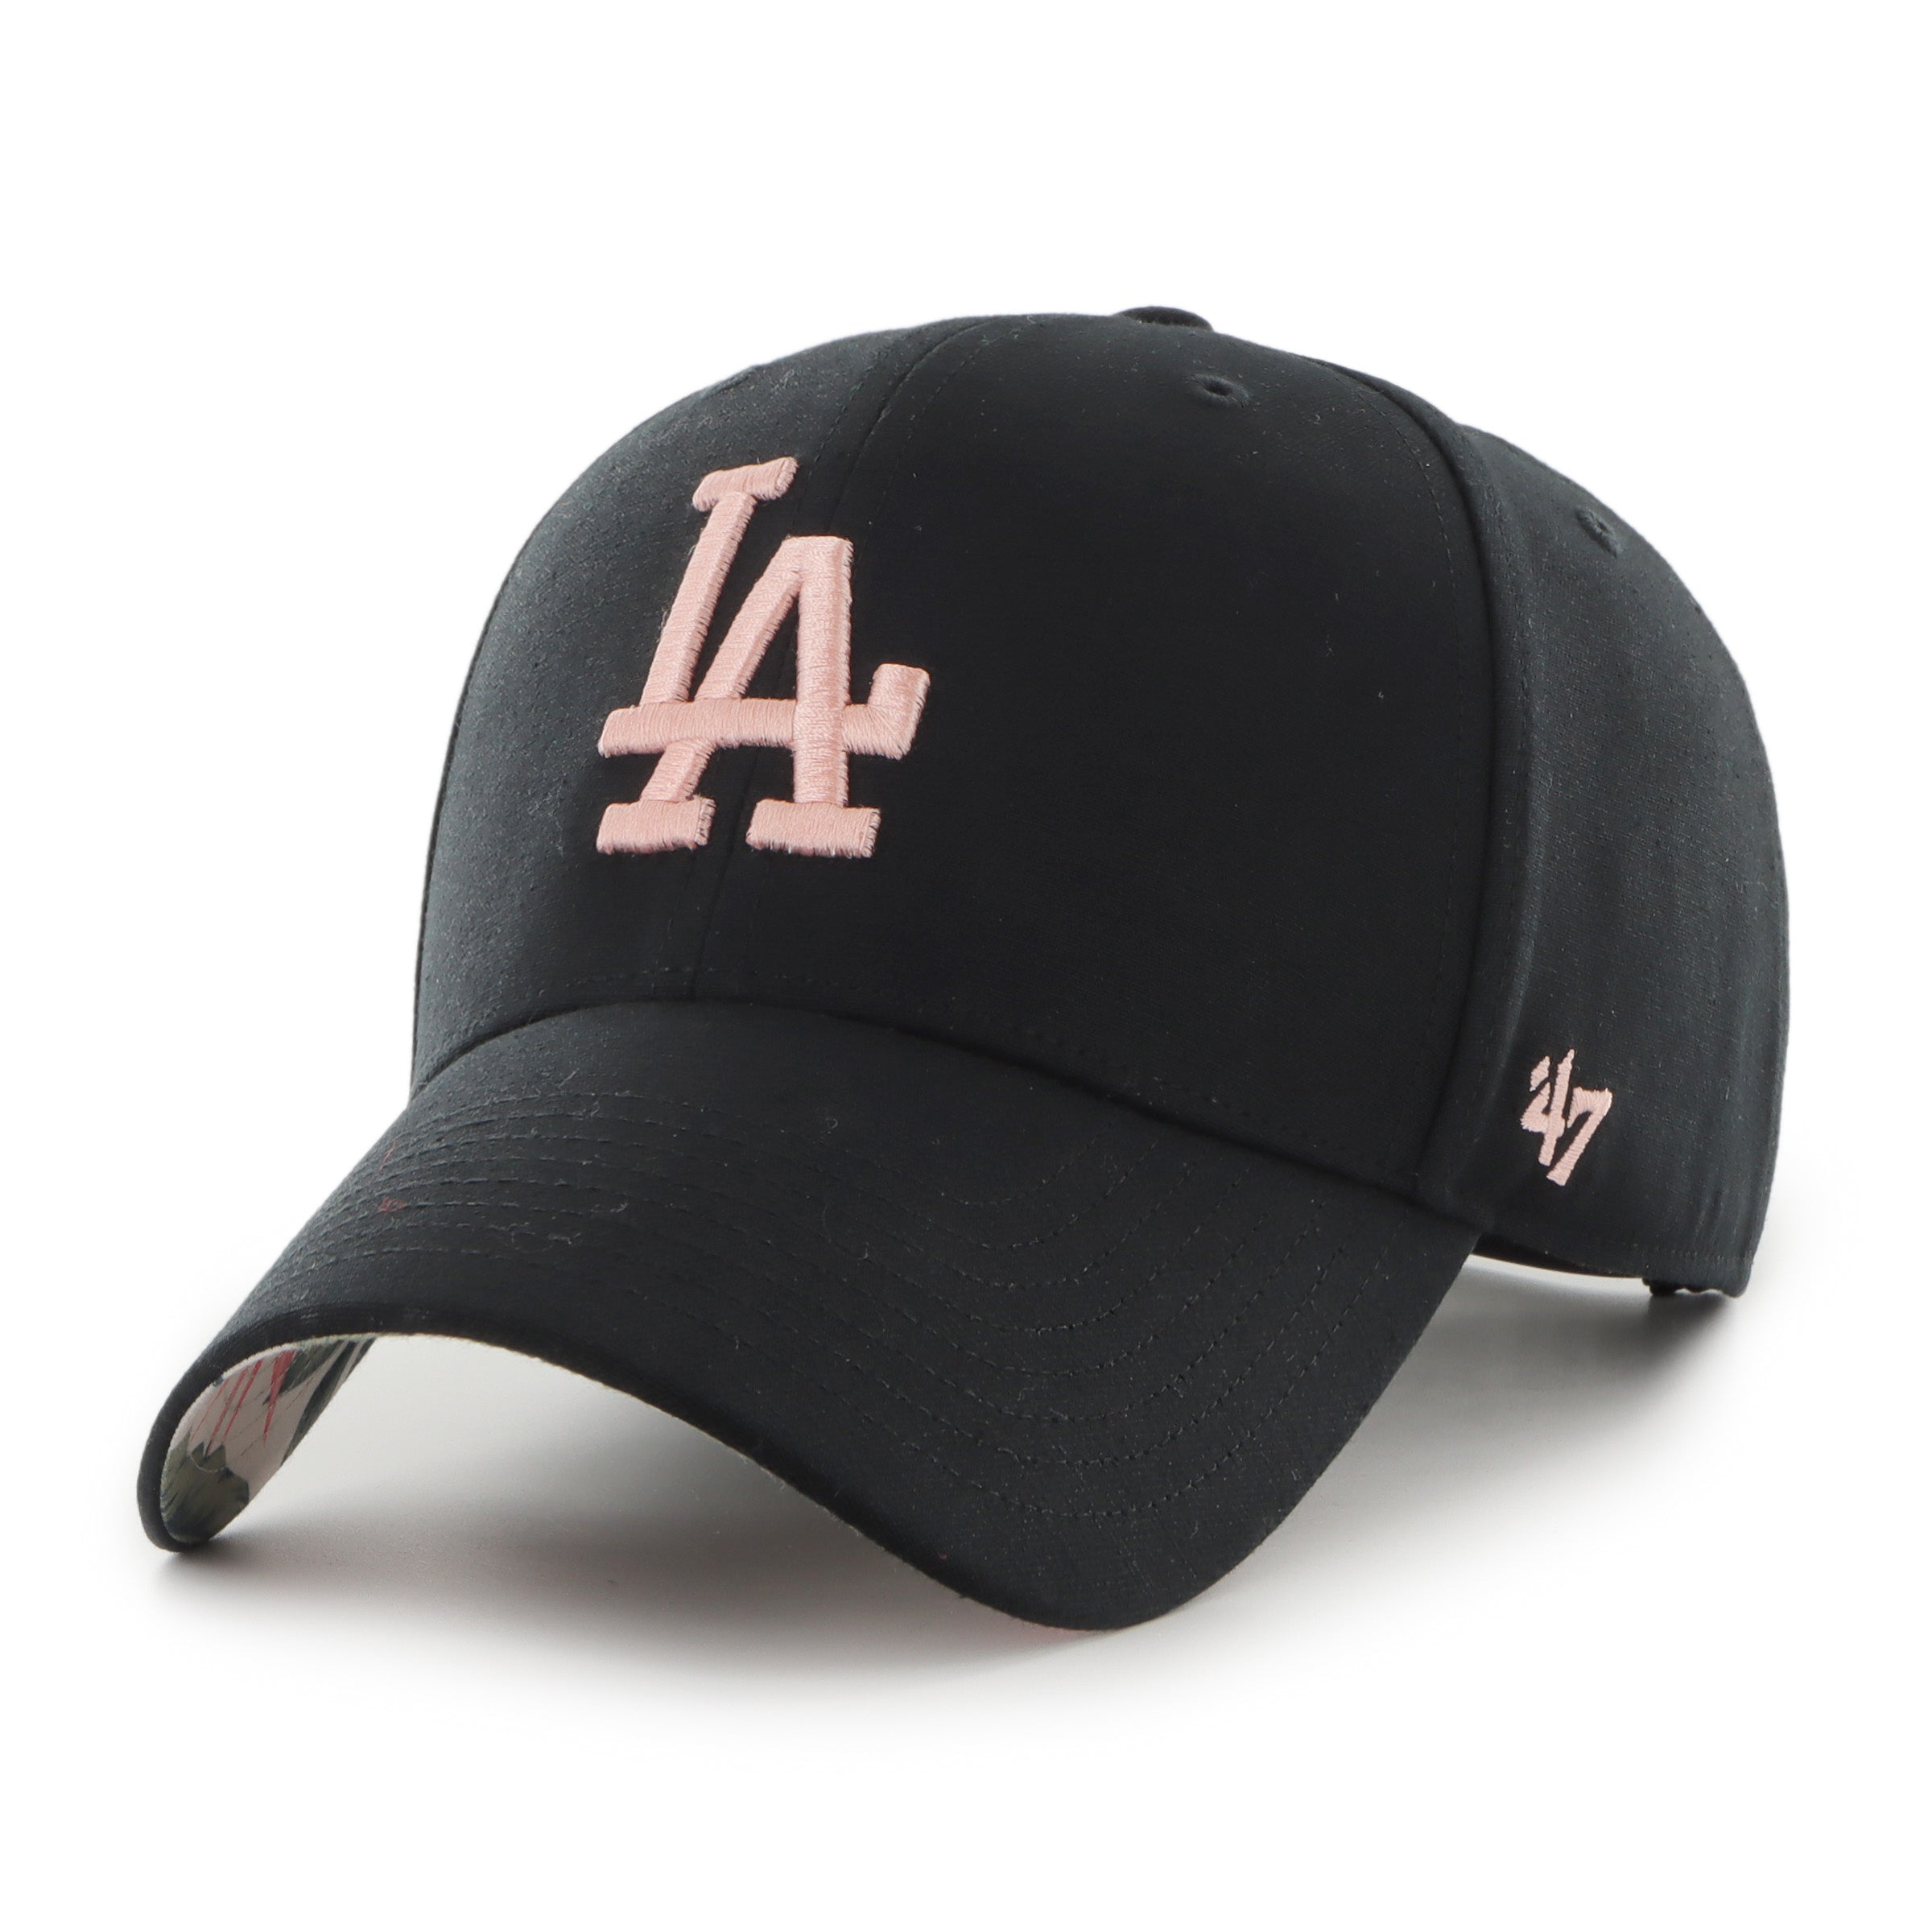 Stay stylish with the Los Angeles Dodgers Pink Campus Cap